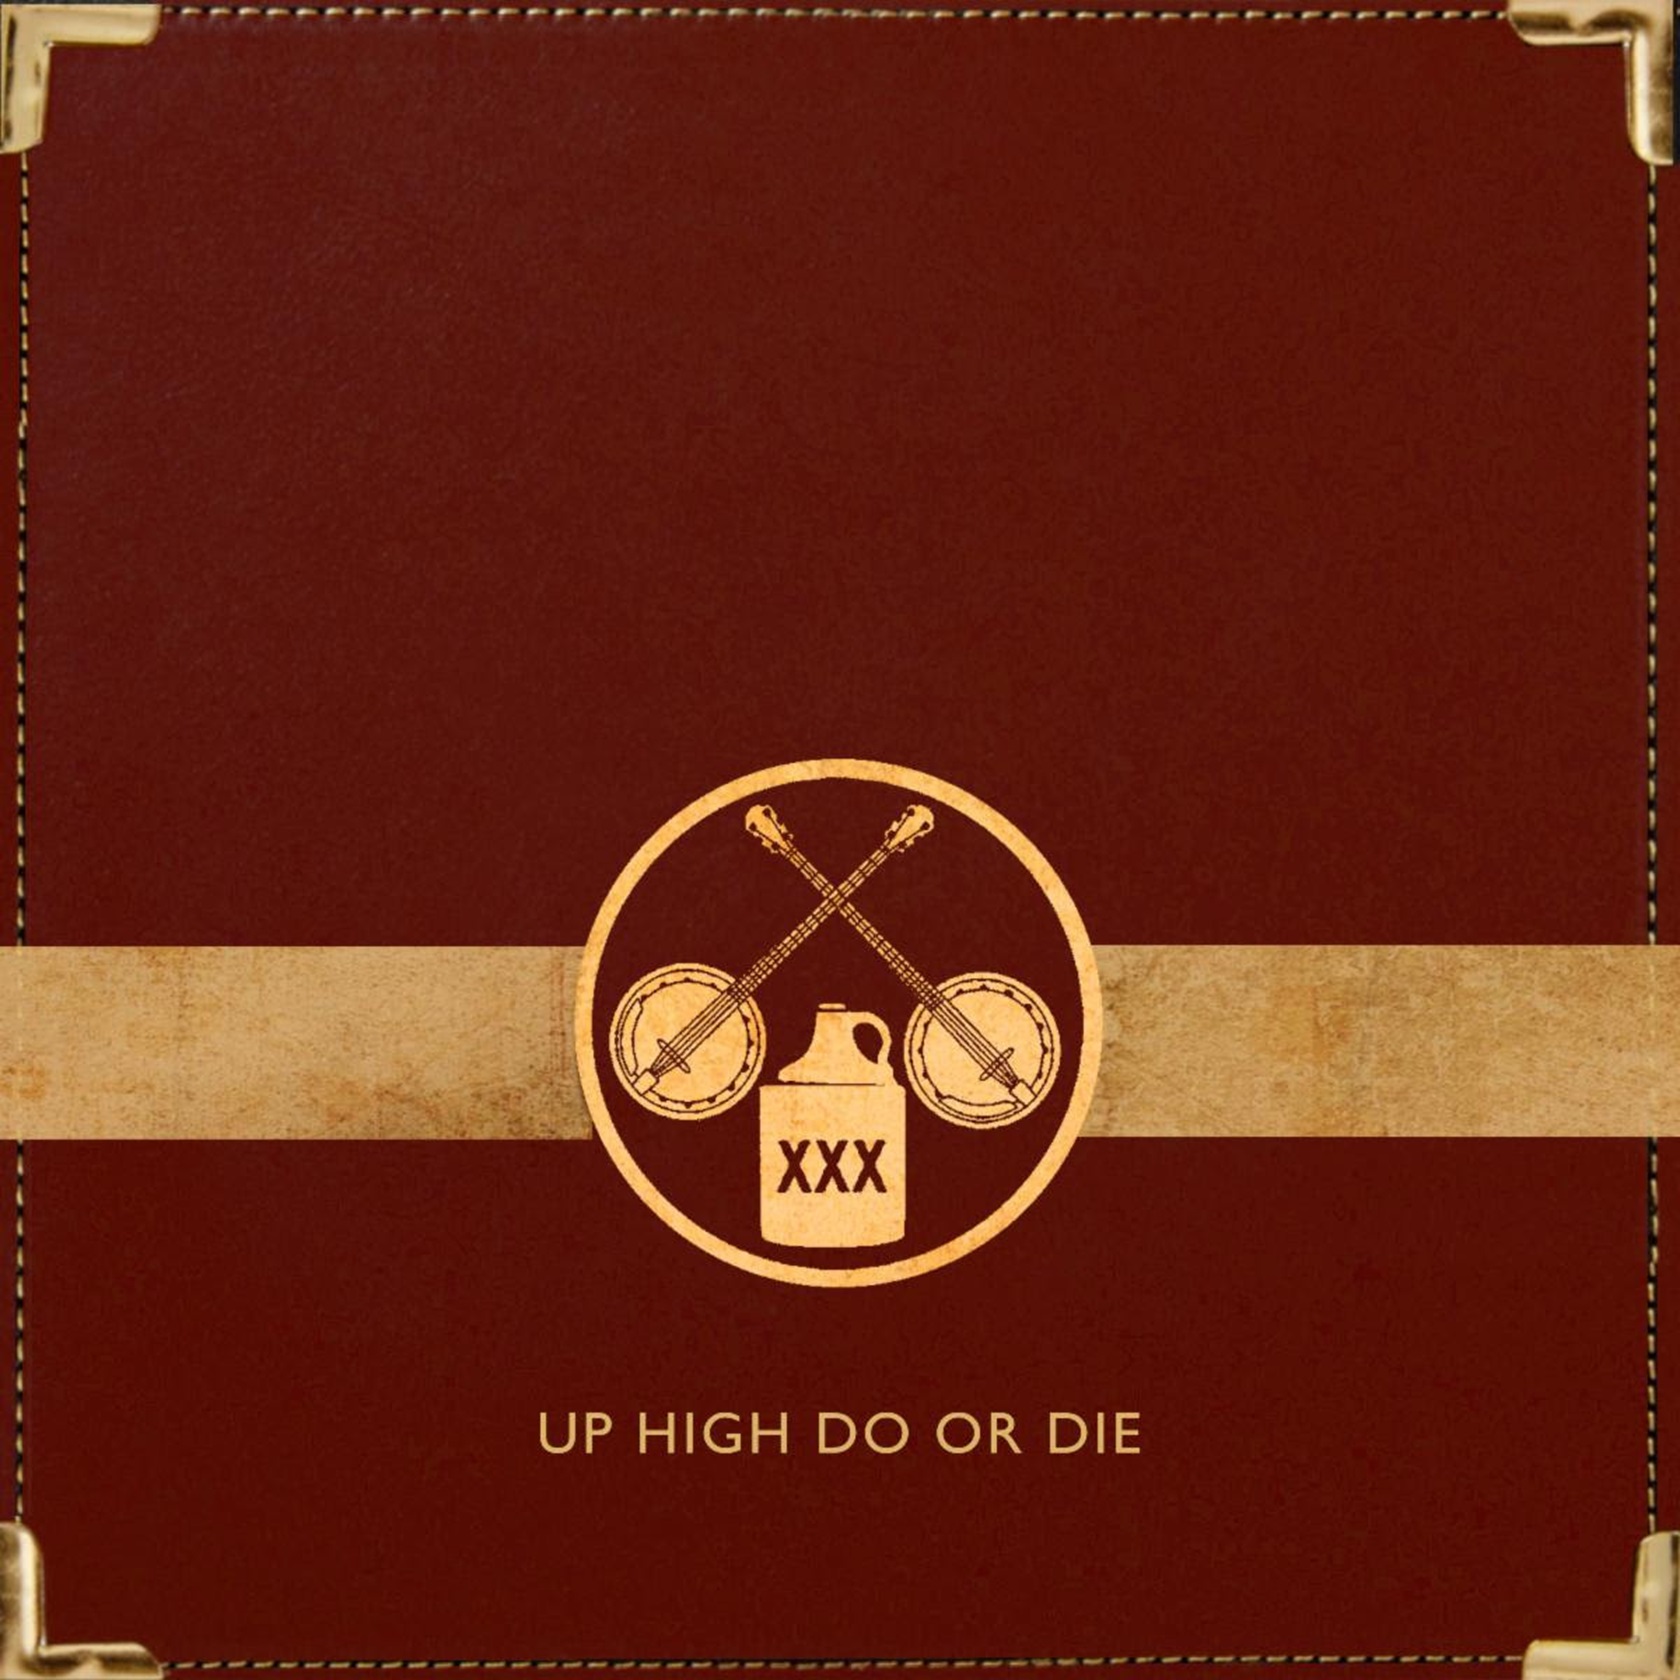 Gangstagrass Release Anthemic Single "Up High Do or Die"